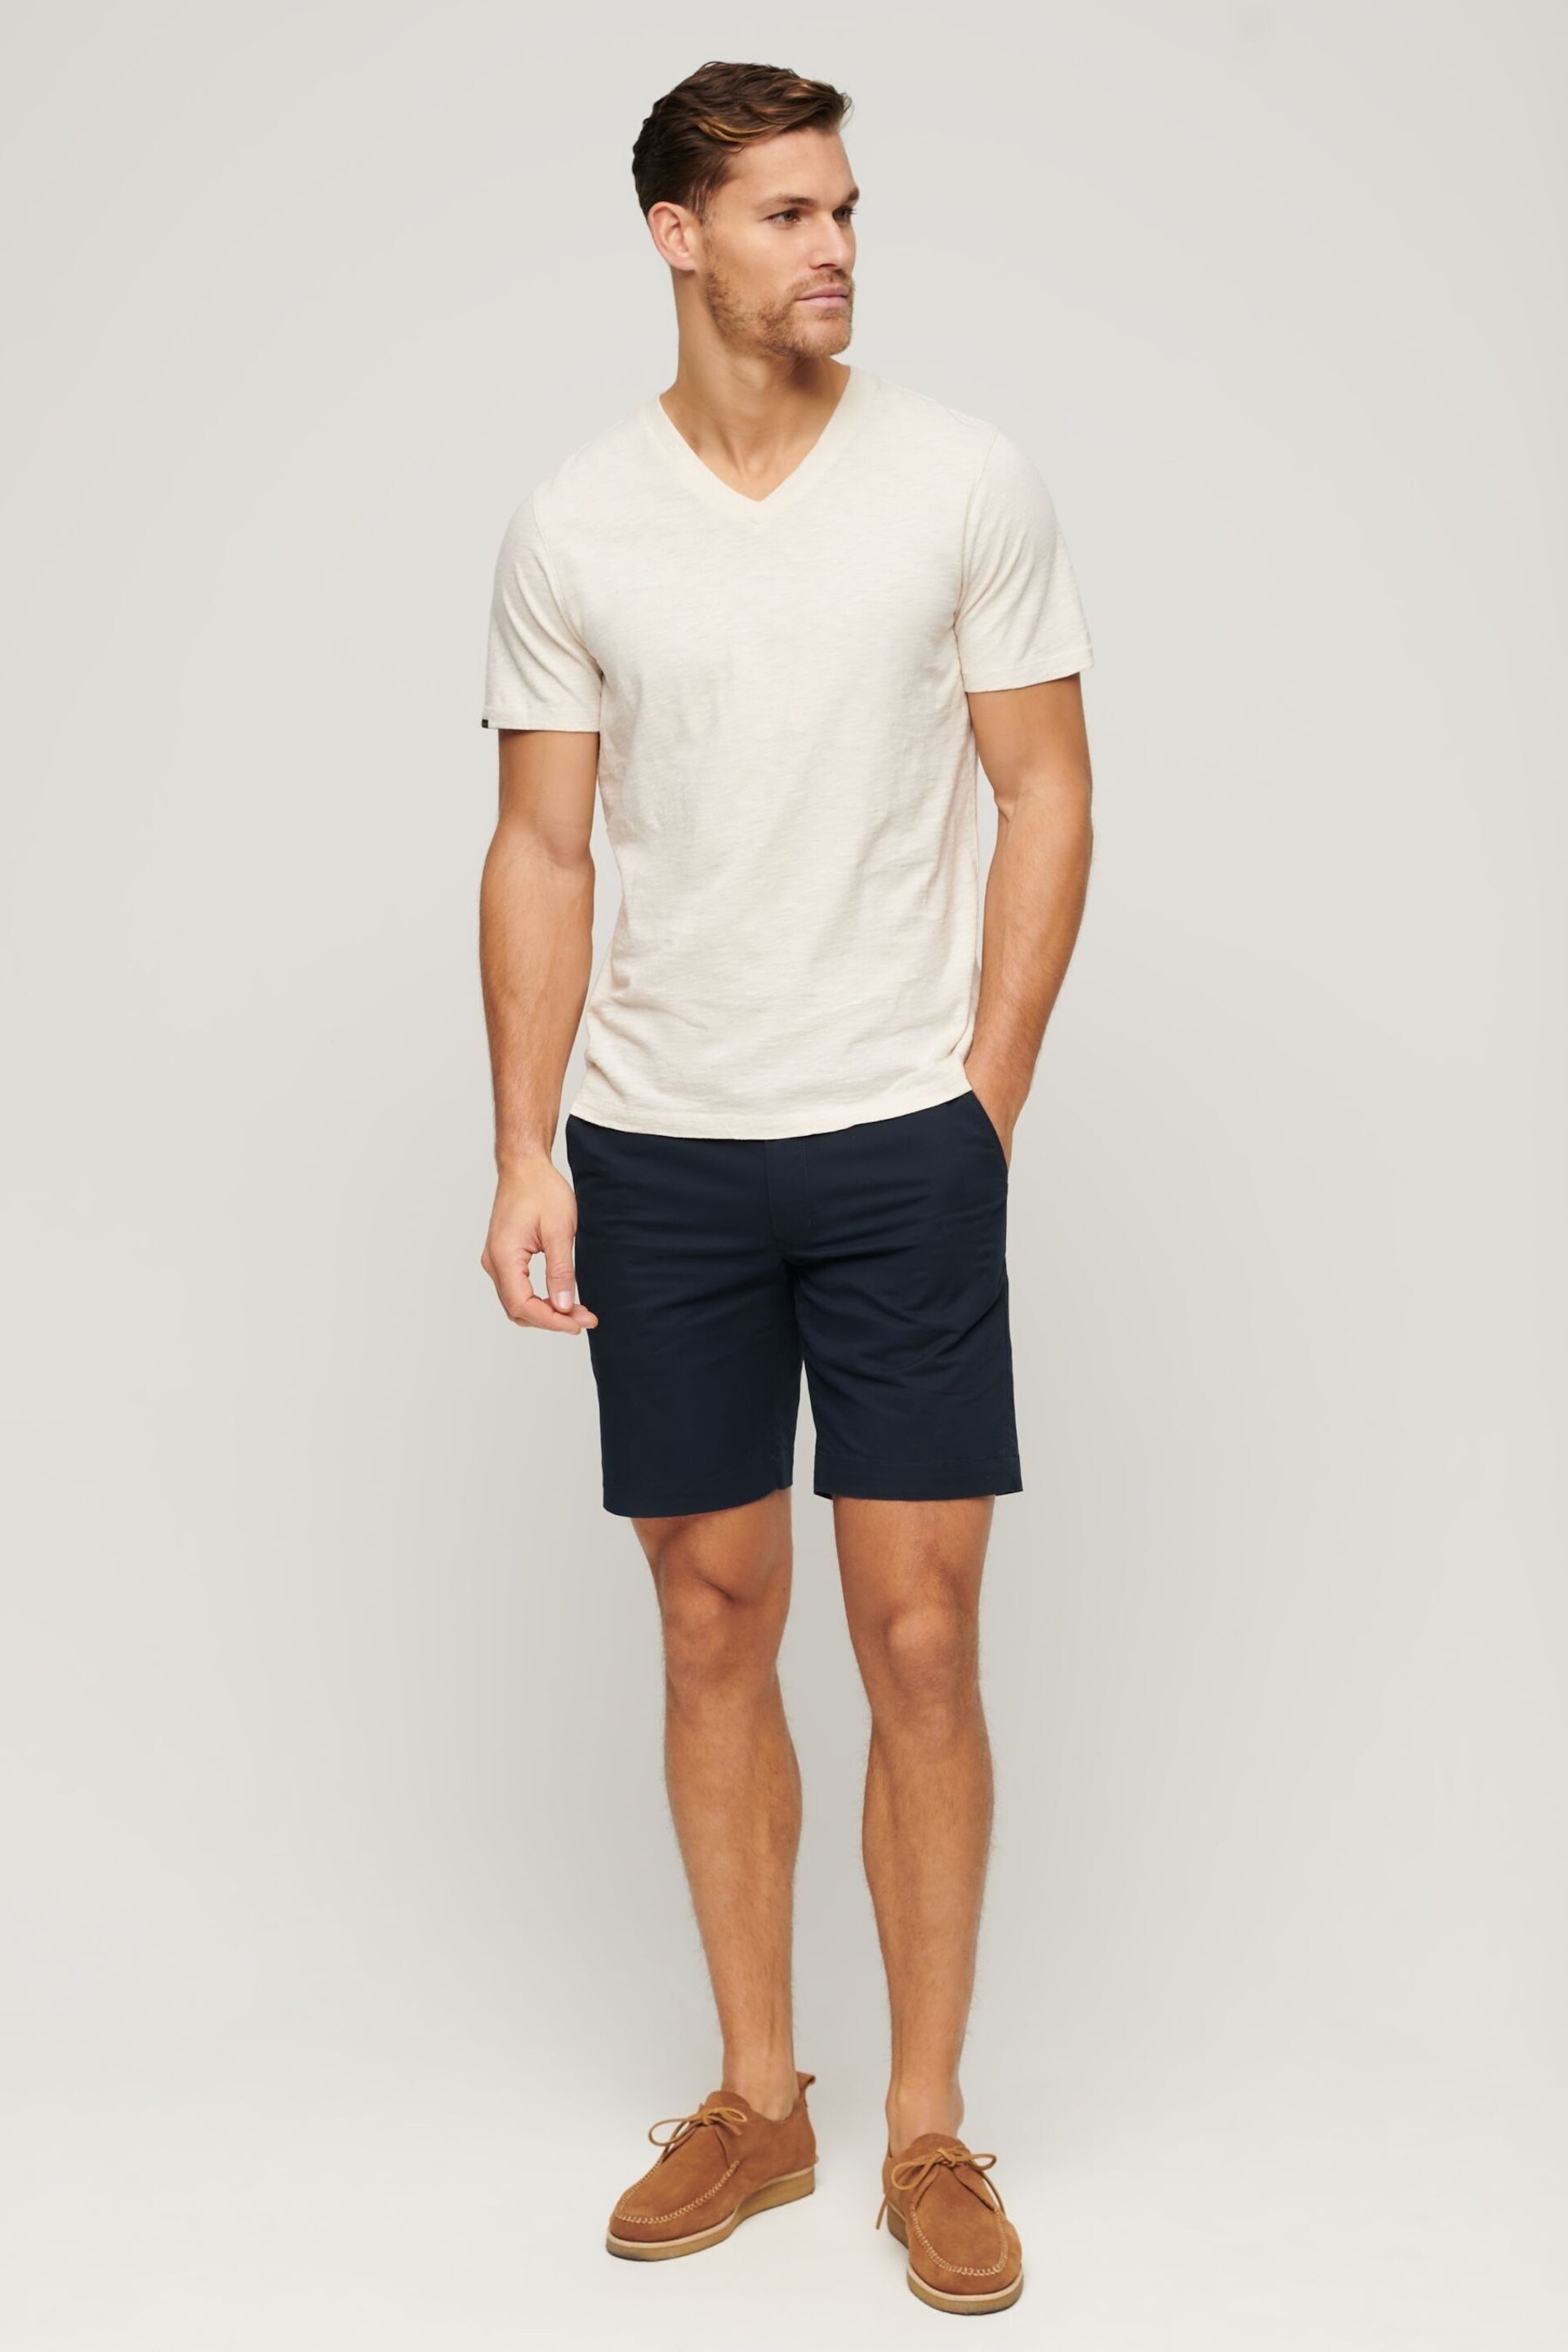 Superdry Blue Stretch Chinos Shorts - Image 2 of 7